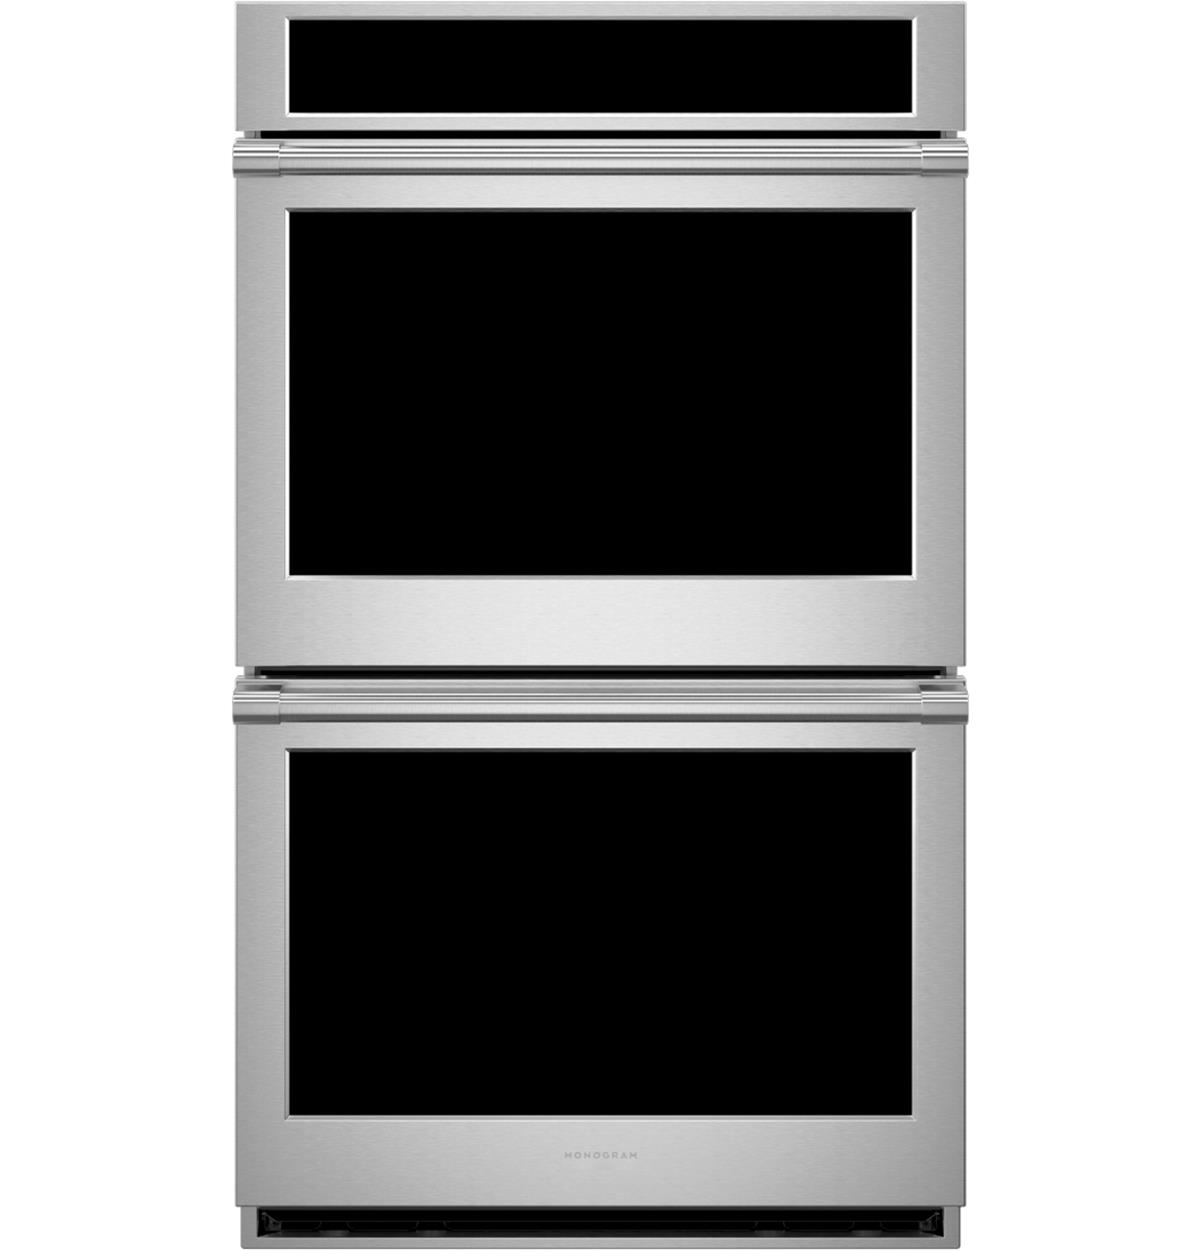 Monogram Smart Electric convection double wall oven from the Statement Collection.